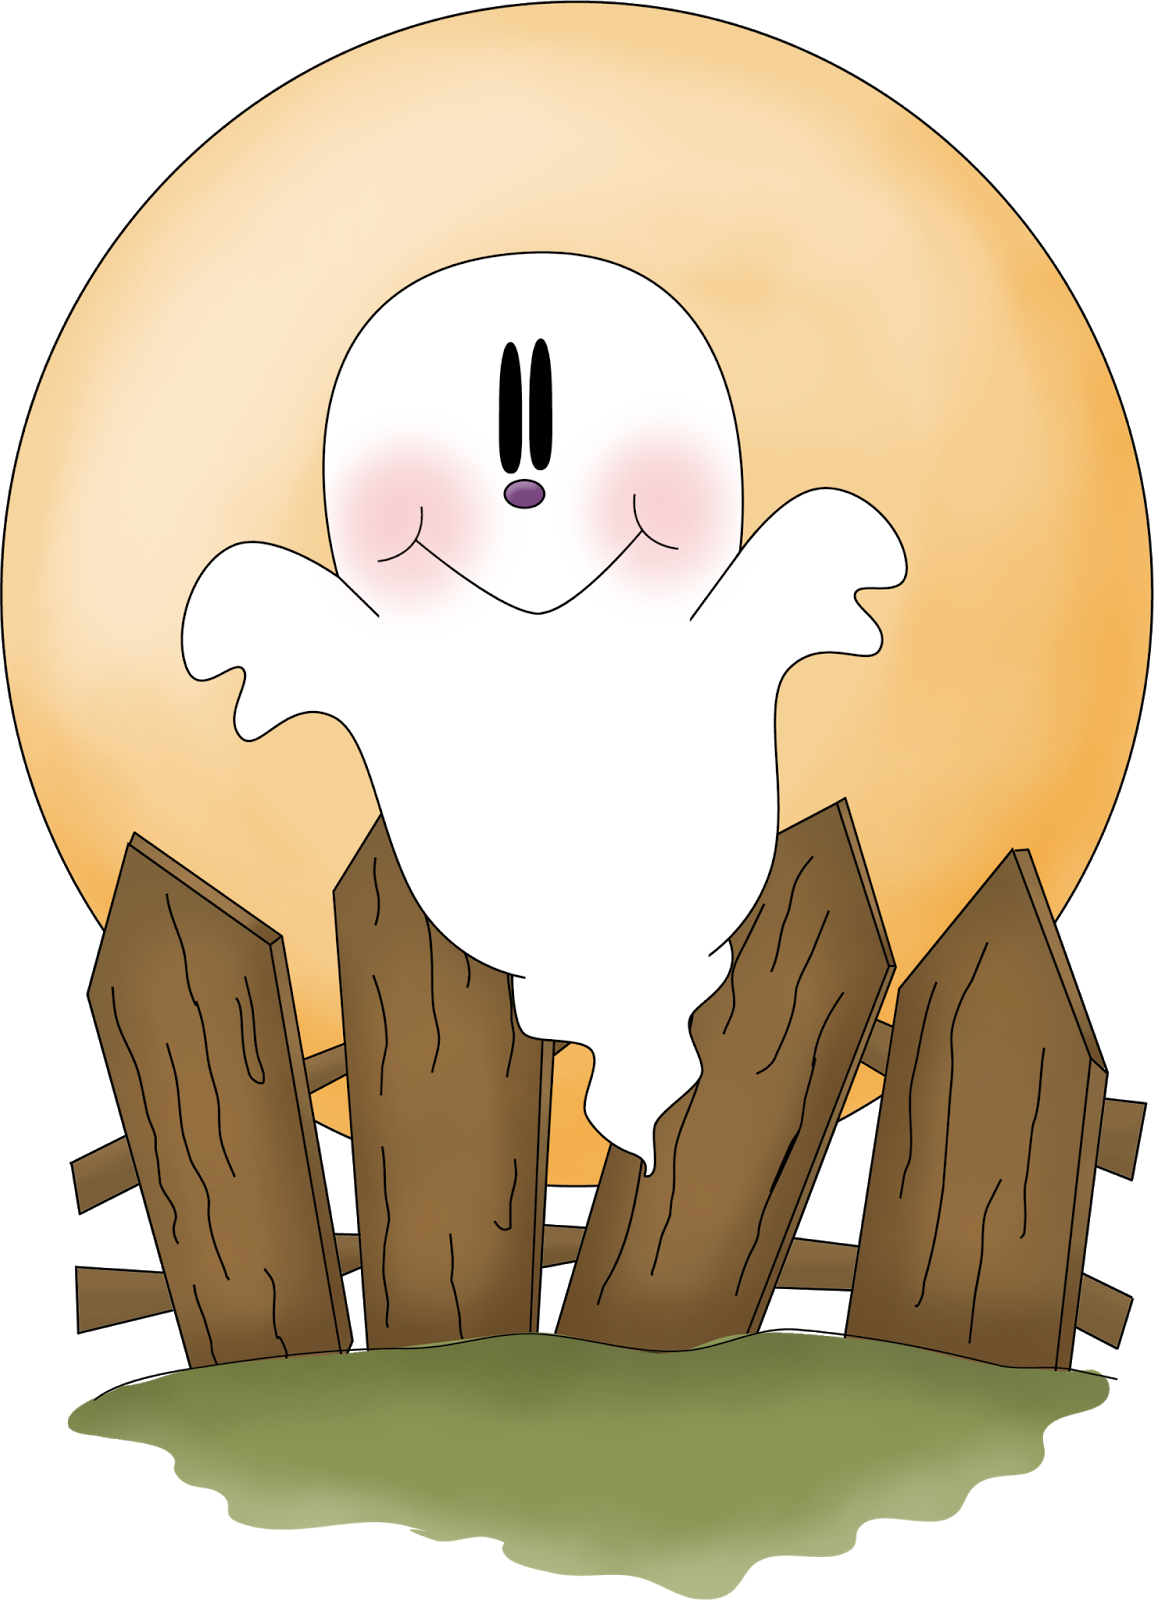 Halloween Ghosts Clipart. | Oh My Fiesta! in english